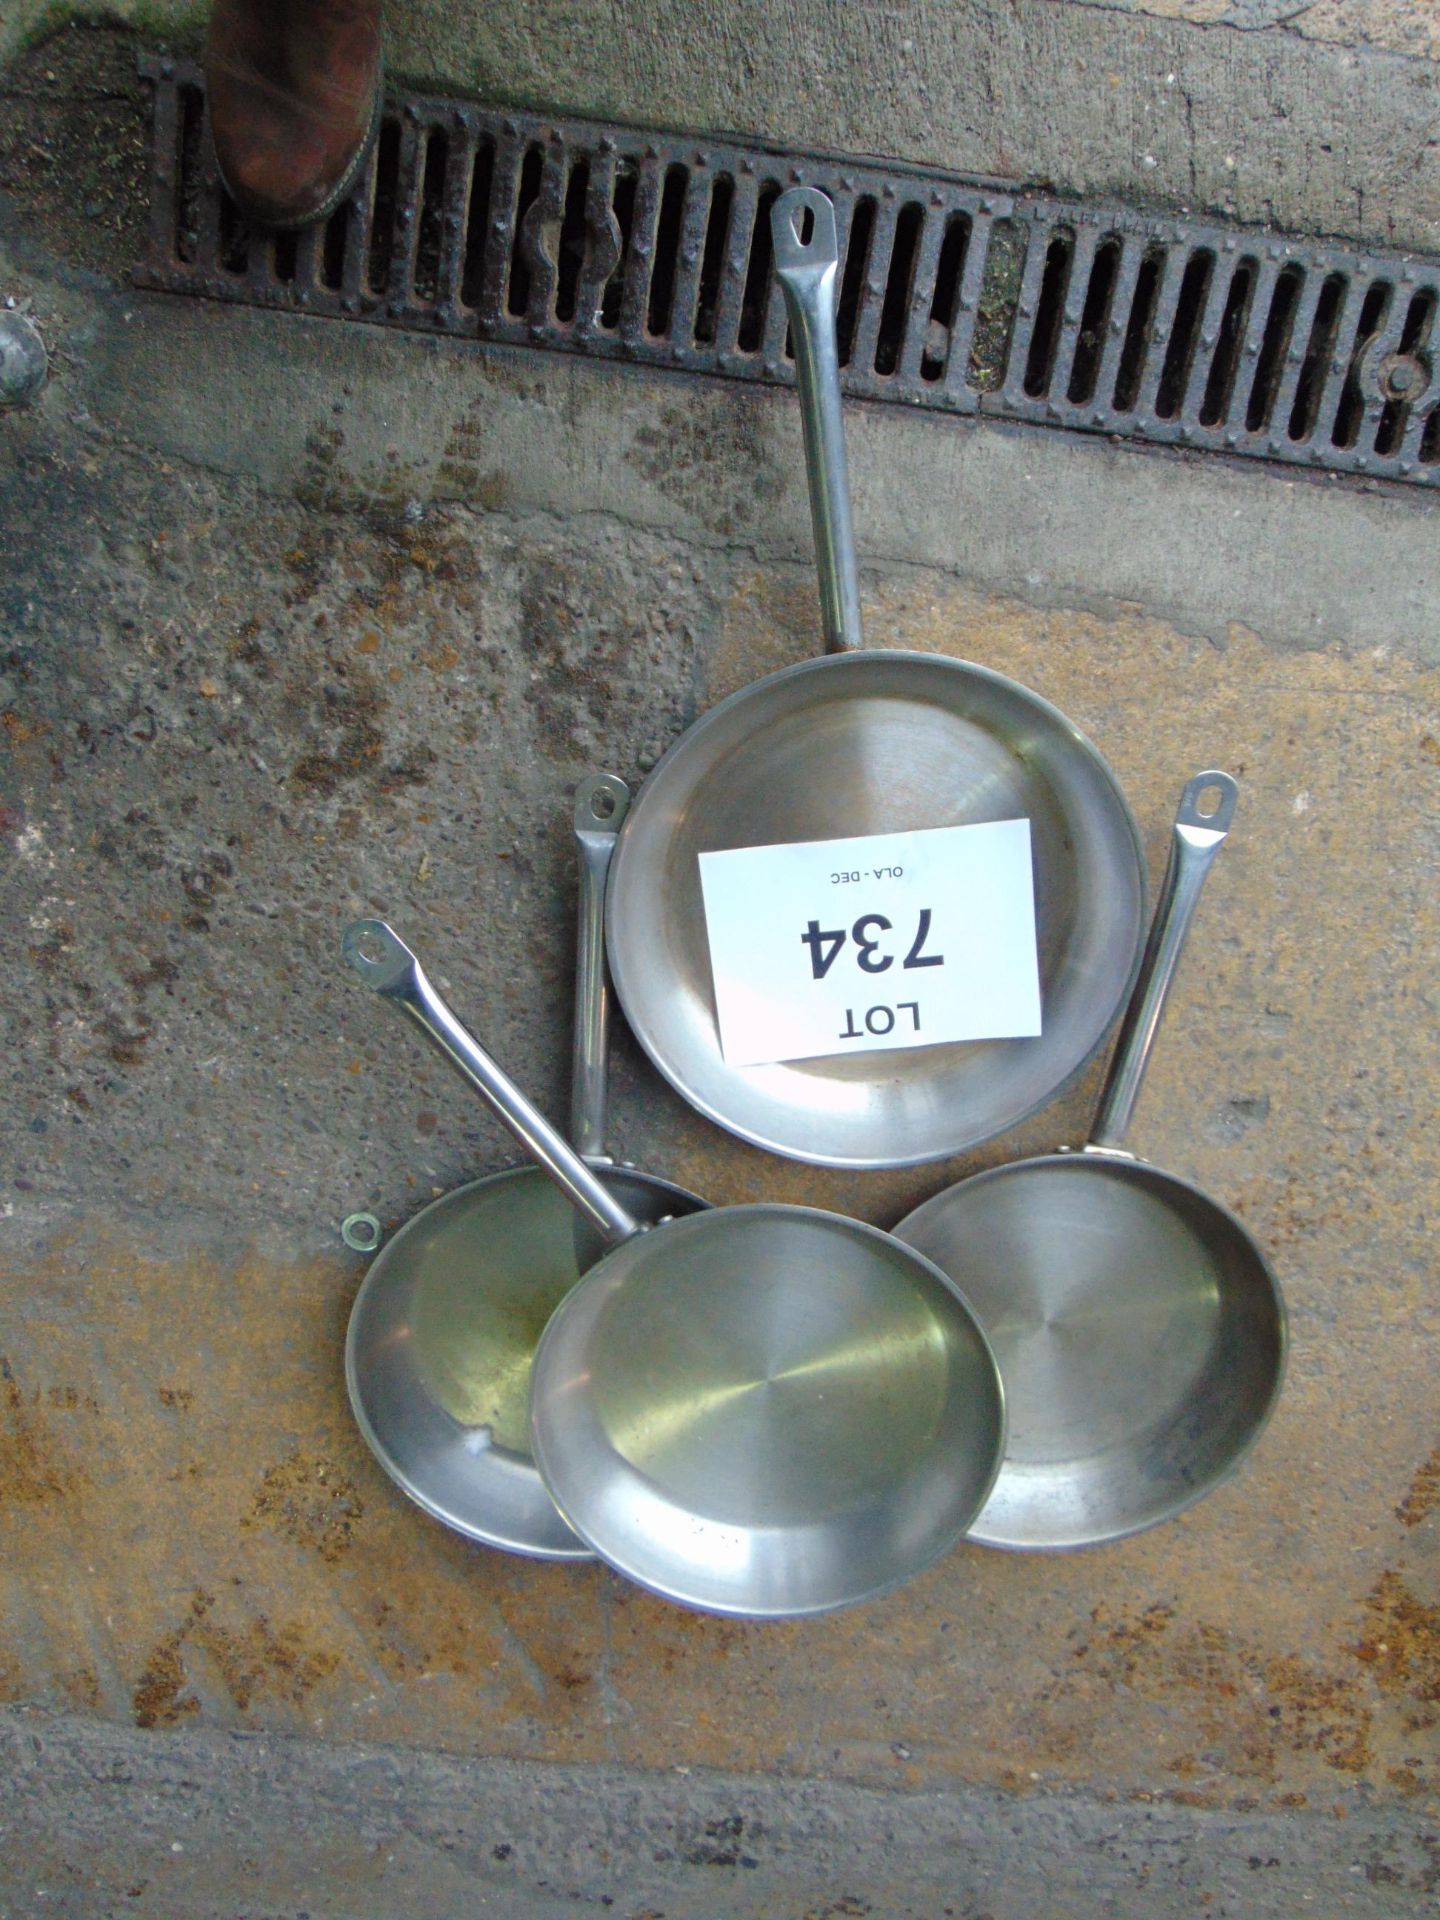 4X LARGE BRITISH ARMY STAINLESS STEEL FRYING PANS - Image 2 of 3